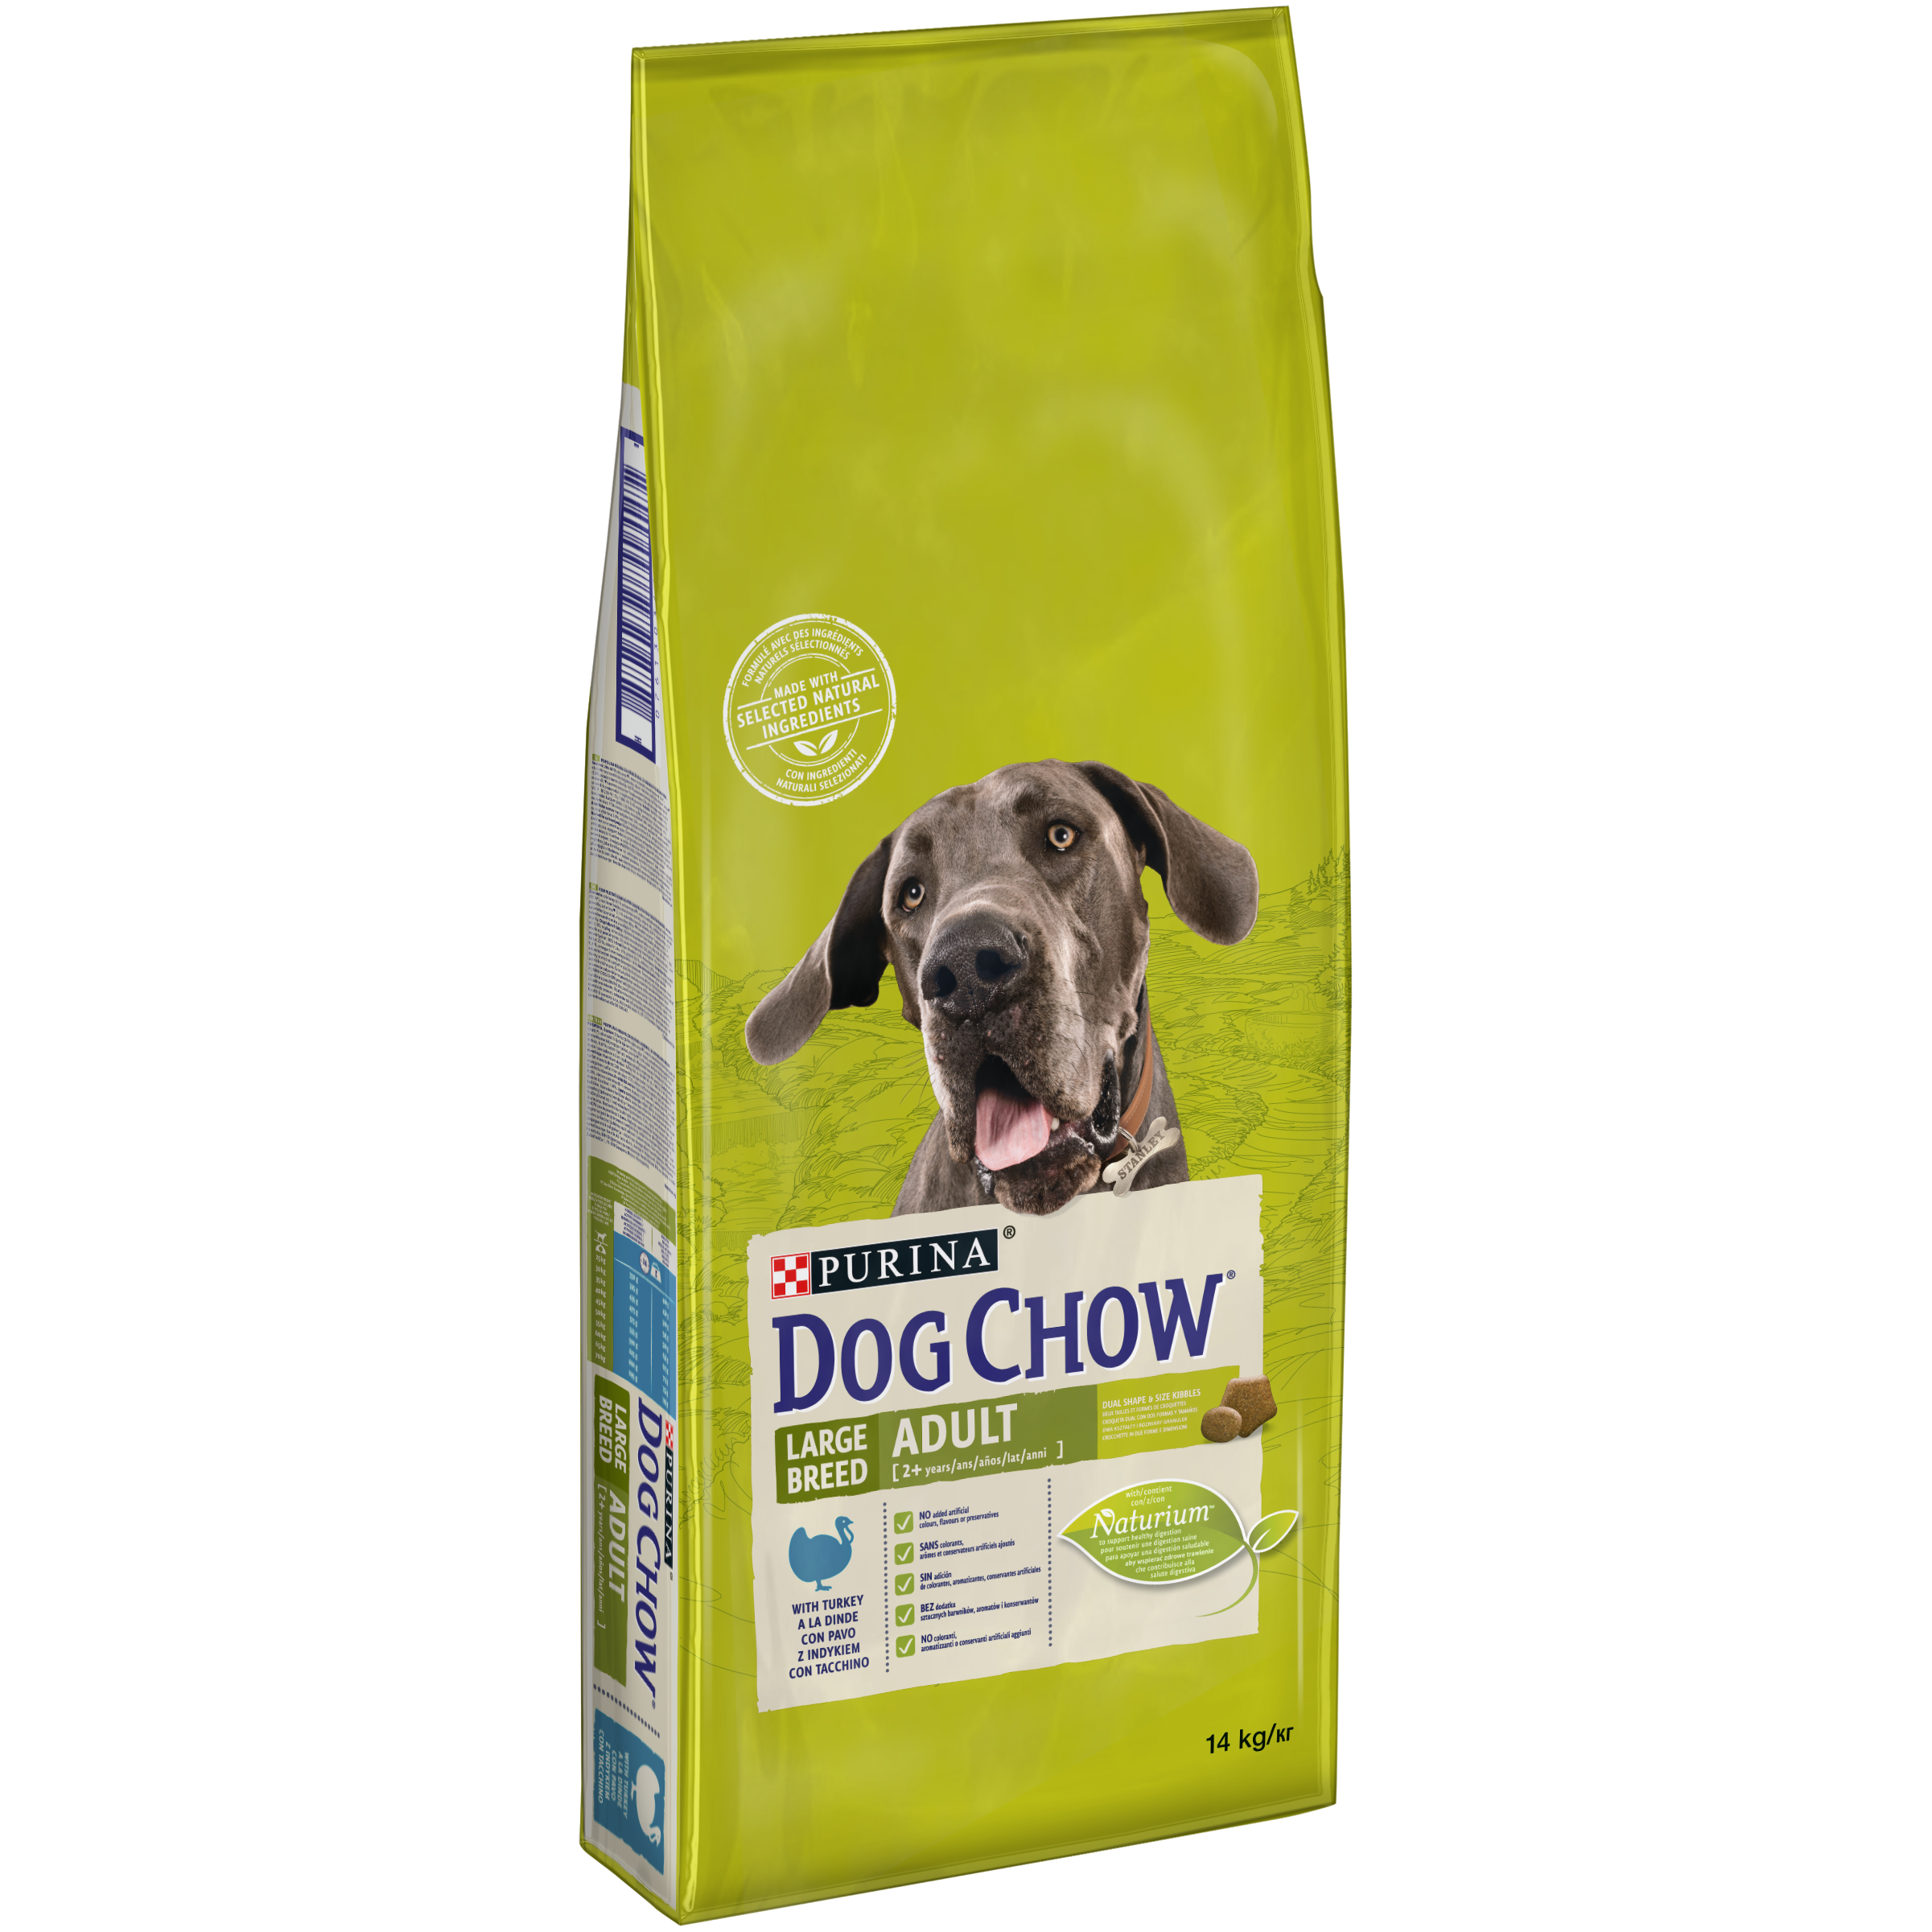 DOG CHOW Adult, Talie Mare, Curcan, 14 kg Adult